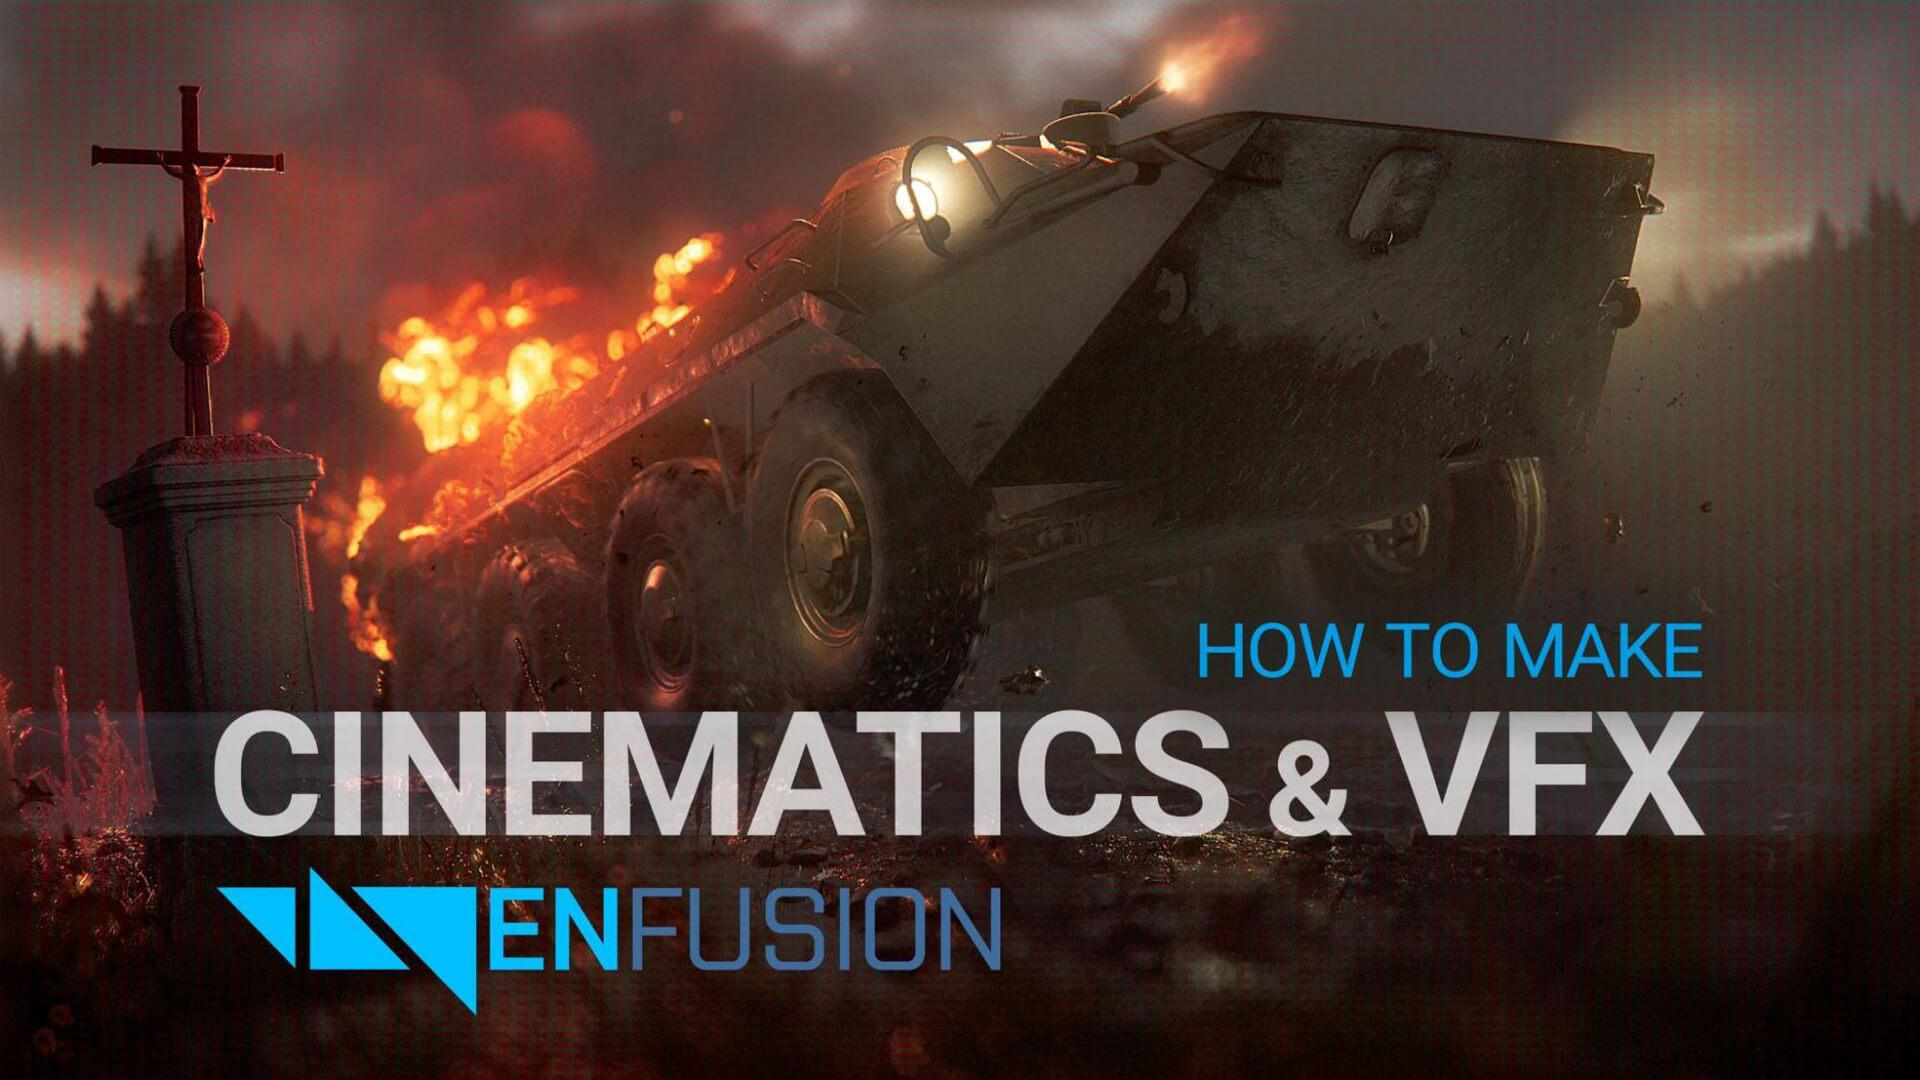 Cover image of Cinematic & VFX Tutorial